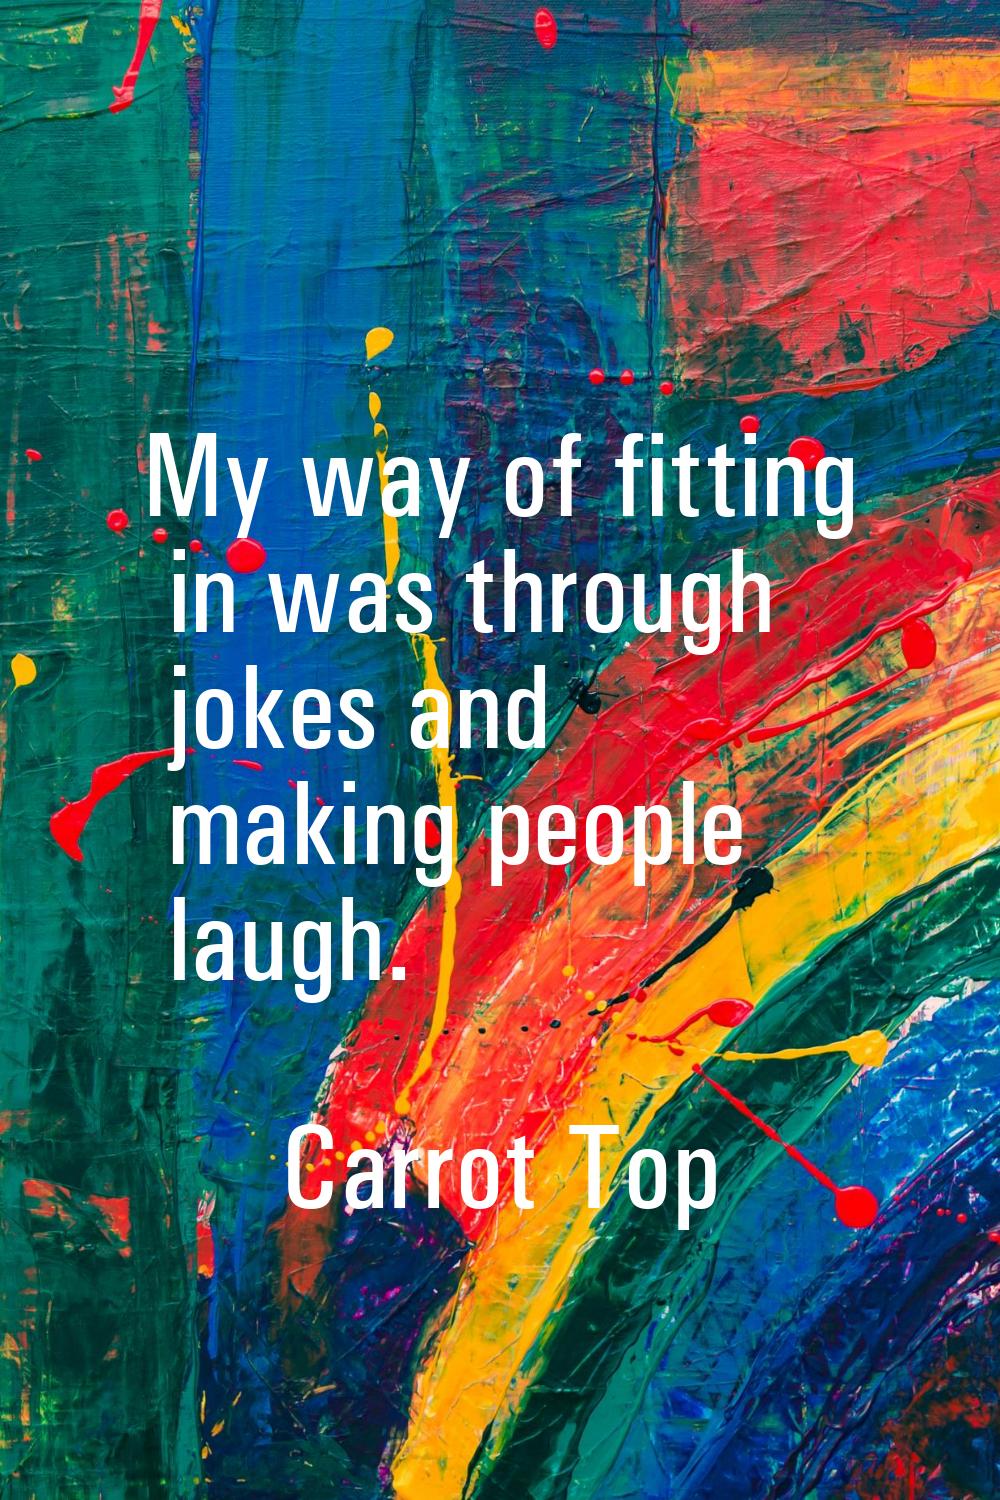 My way of fitting in was through jokes and making people laugh.